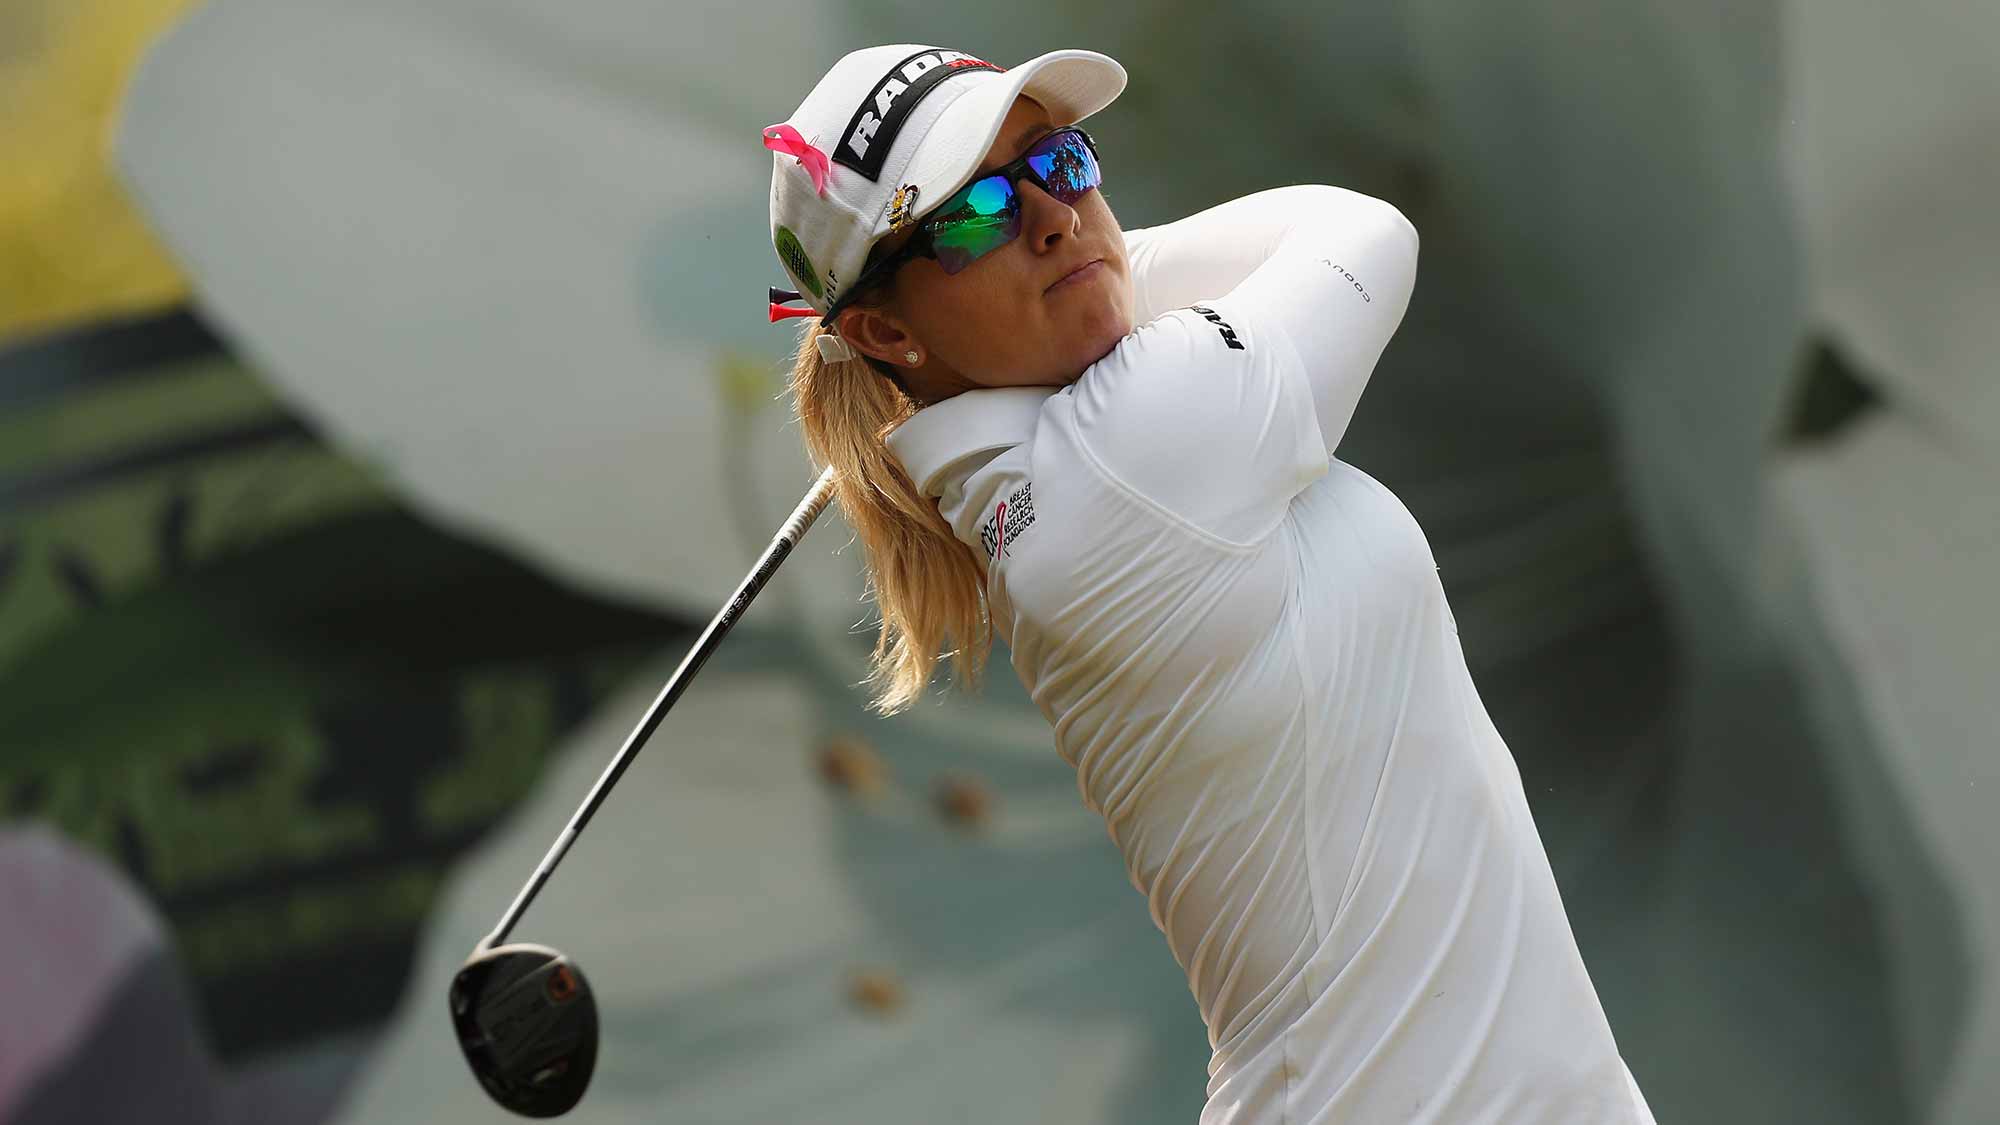 Jodi Ewart Shadoff of England plays her shot during the second round of the Swinging Skirts LPGA Taiwan Championship at Ta Shee Golf & Country Club on October 26, 2018 in Taoyuan, Chinese Taipei